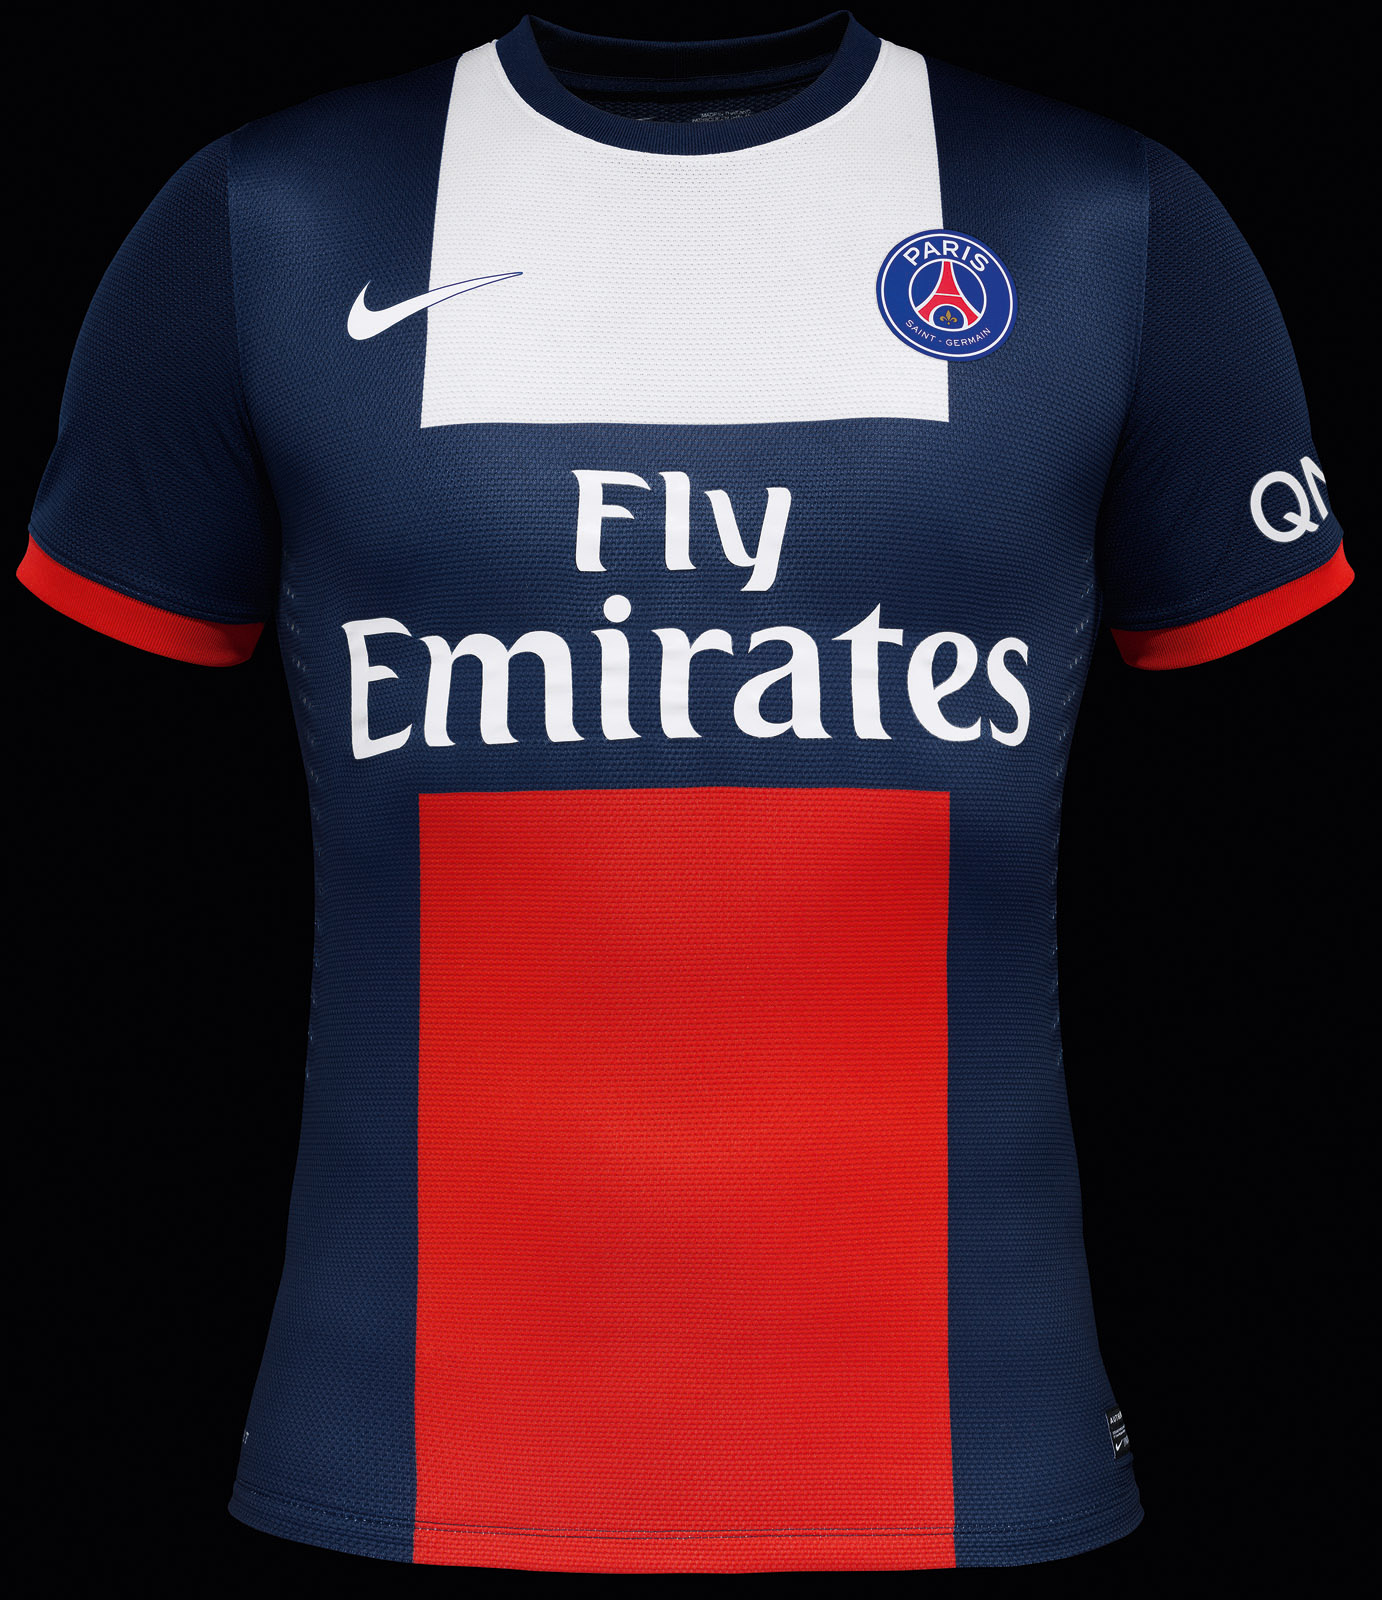 PSG 13-14 (2013-14) Home and Away Kits Released - Footy Headlines